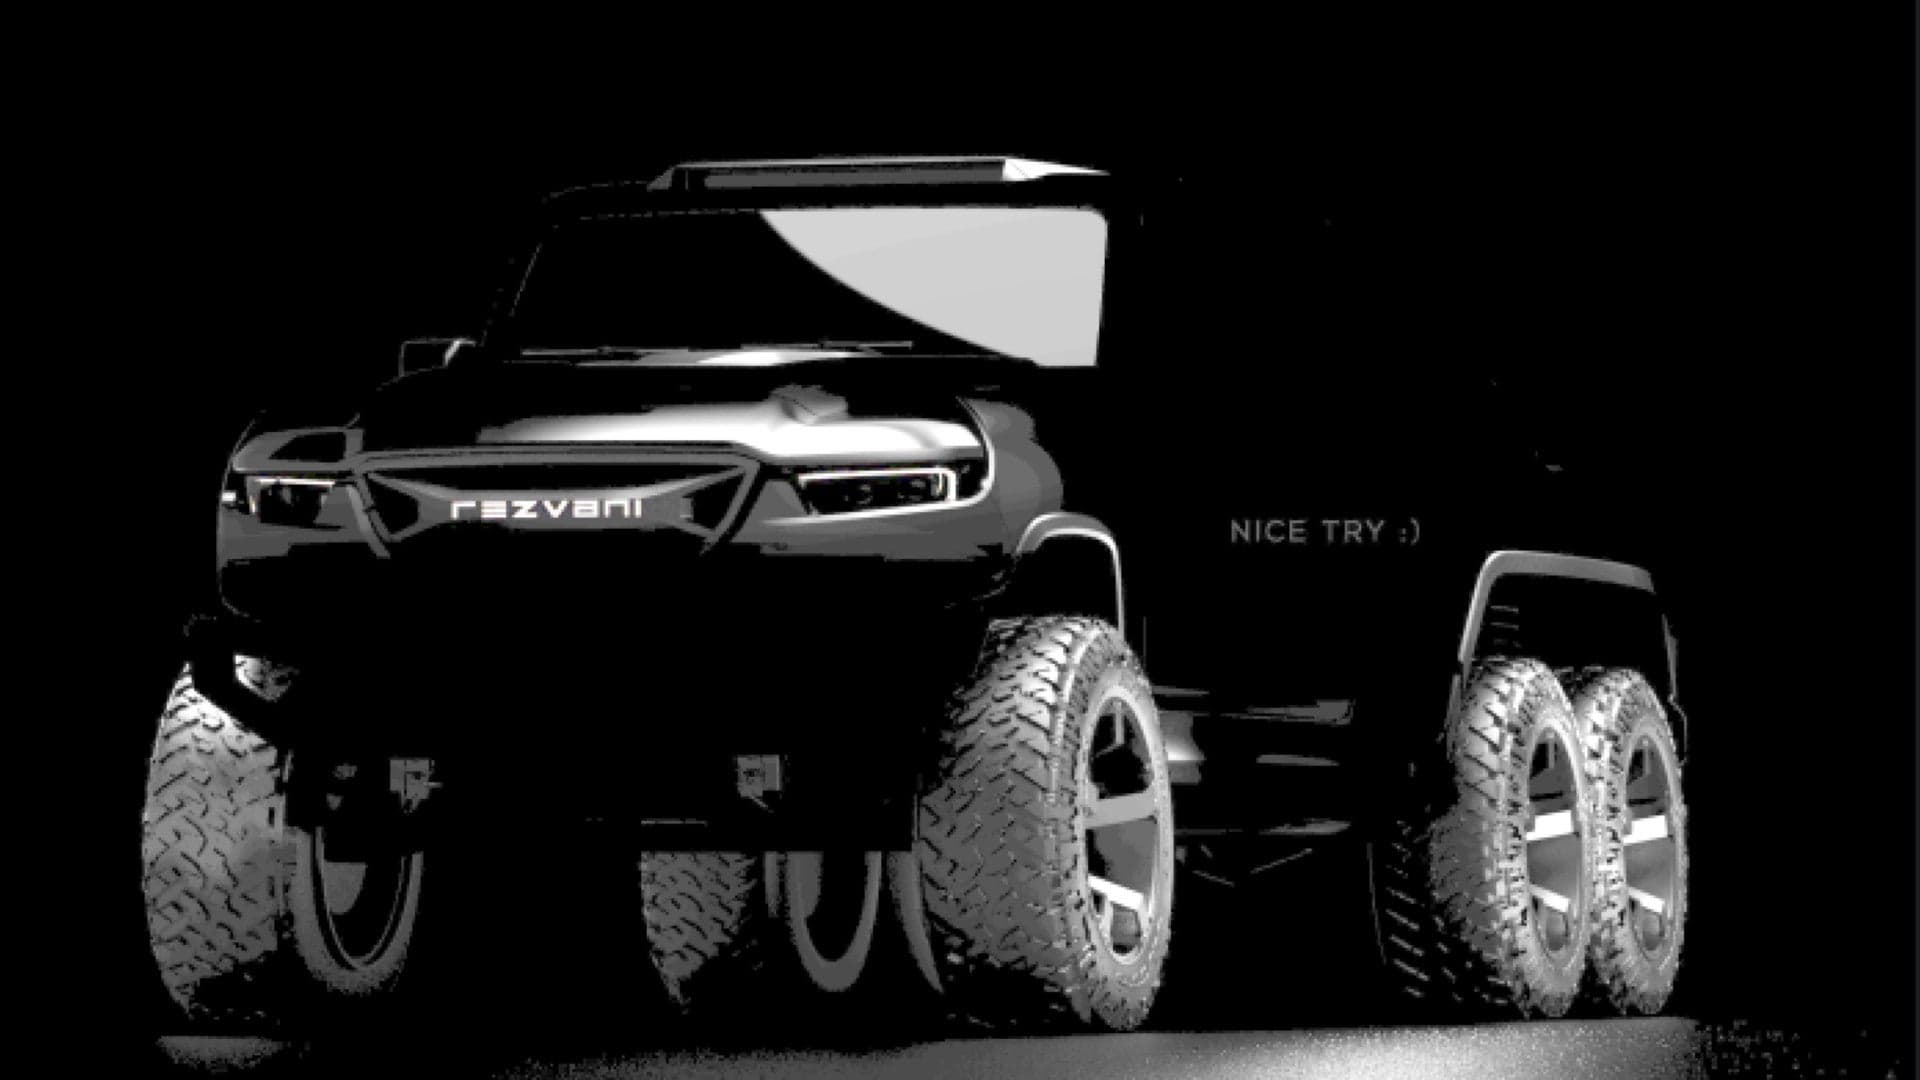 The Rezvani Hercules 6×6 Is a Tacti-Cool Off-Roader With Optional Bulletproofing